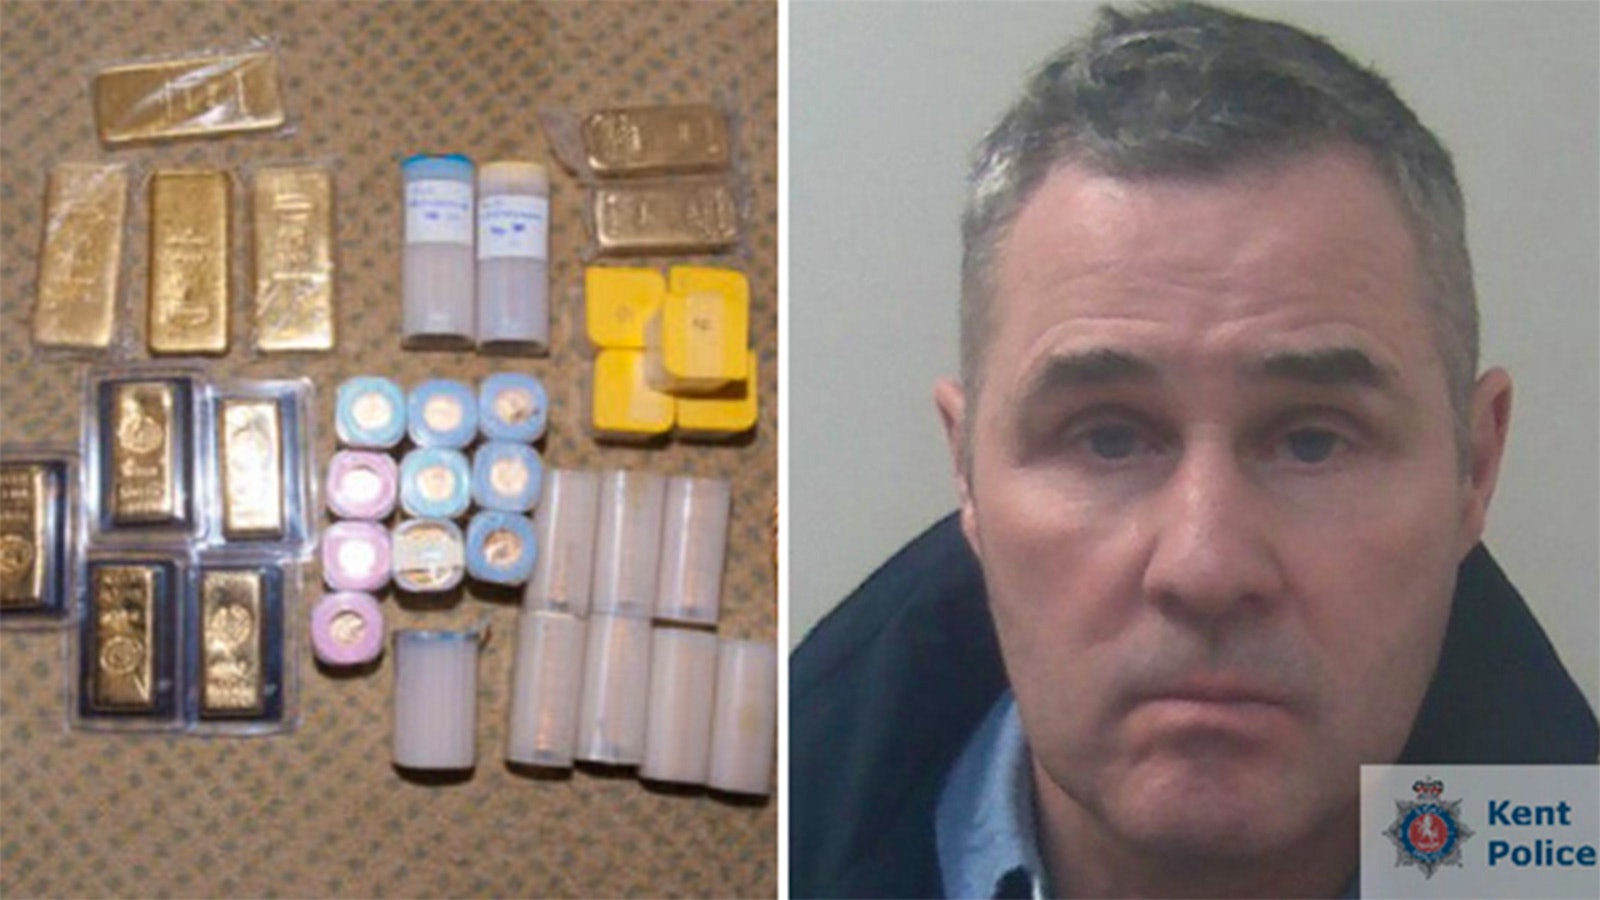  Left: Gold bars and other items recovered by police in a hotel room. Right: Police photo of Bordeaux Cellars CEO Stephen Burton